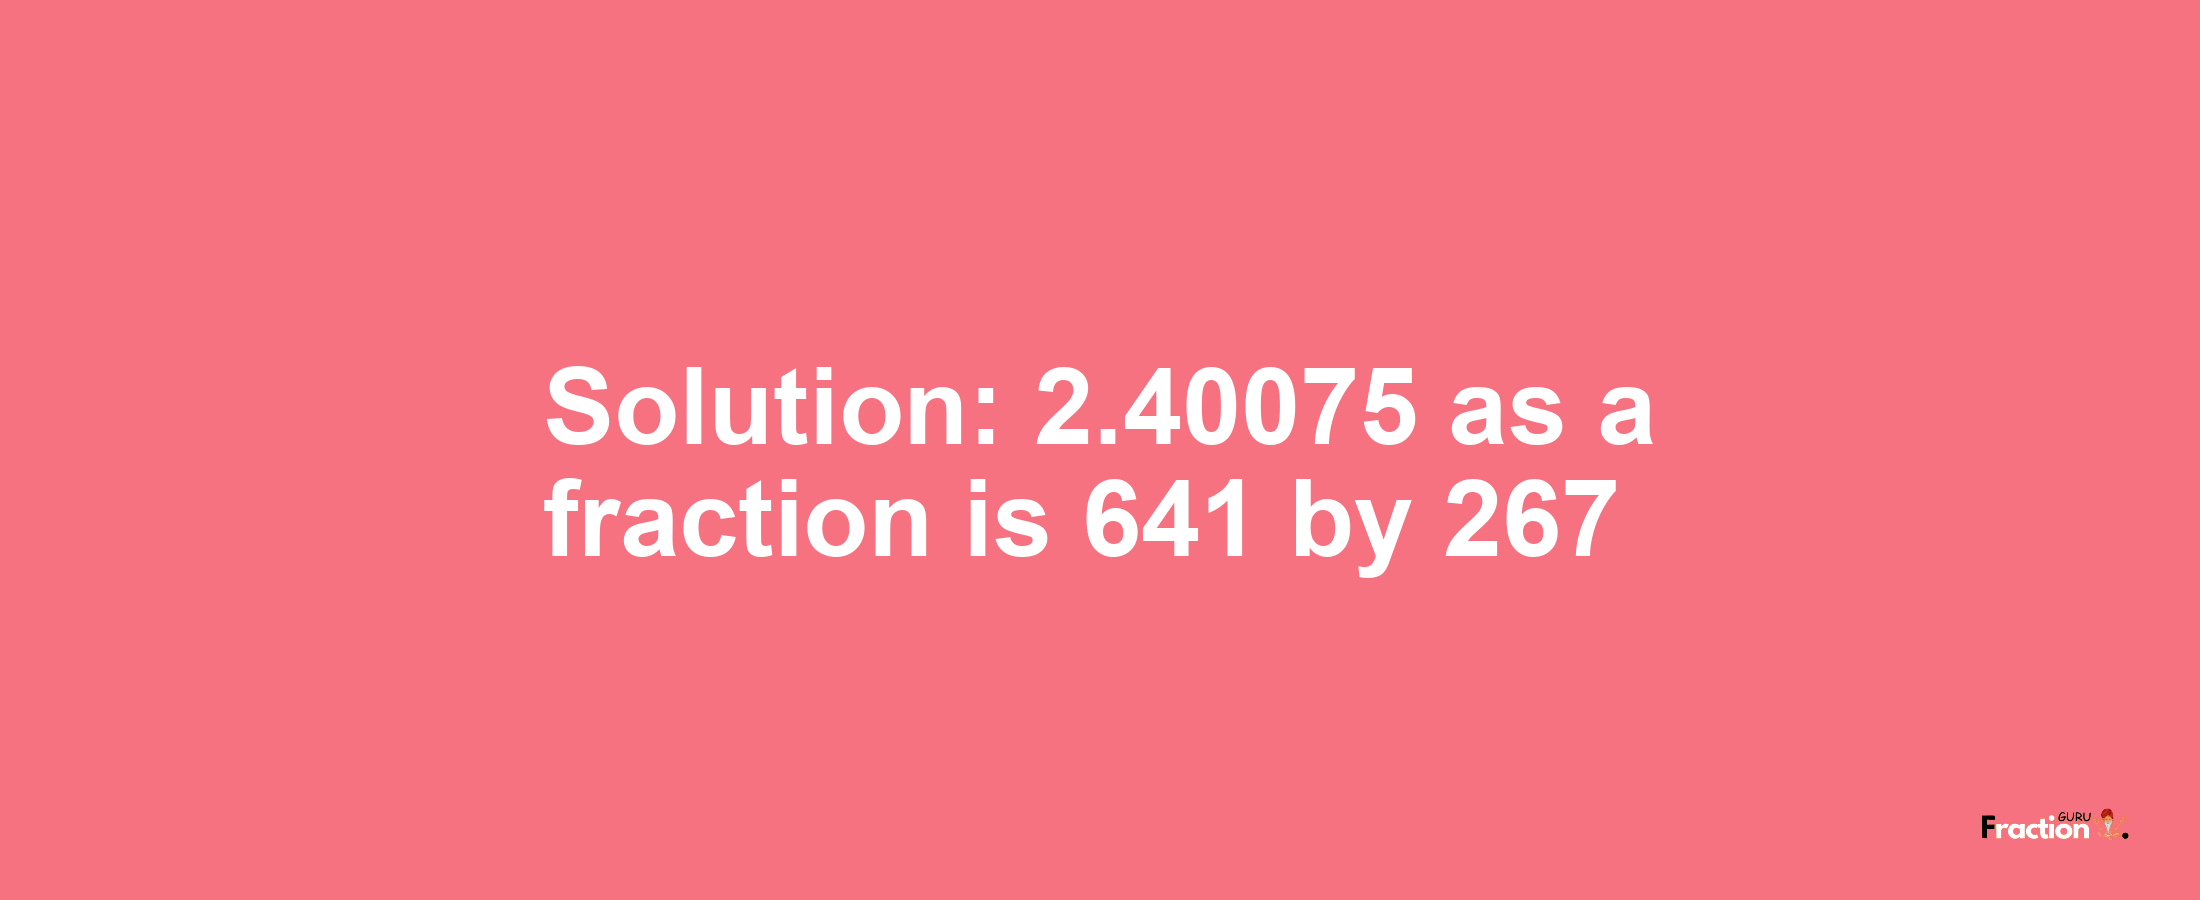 Solution:2.40075 as a fraction is 641/267